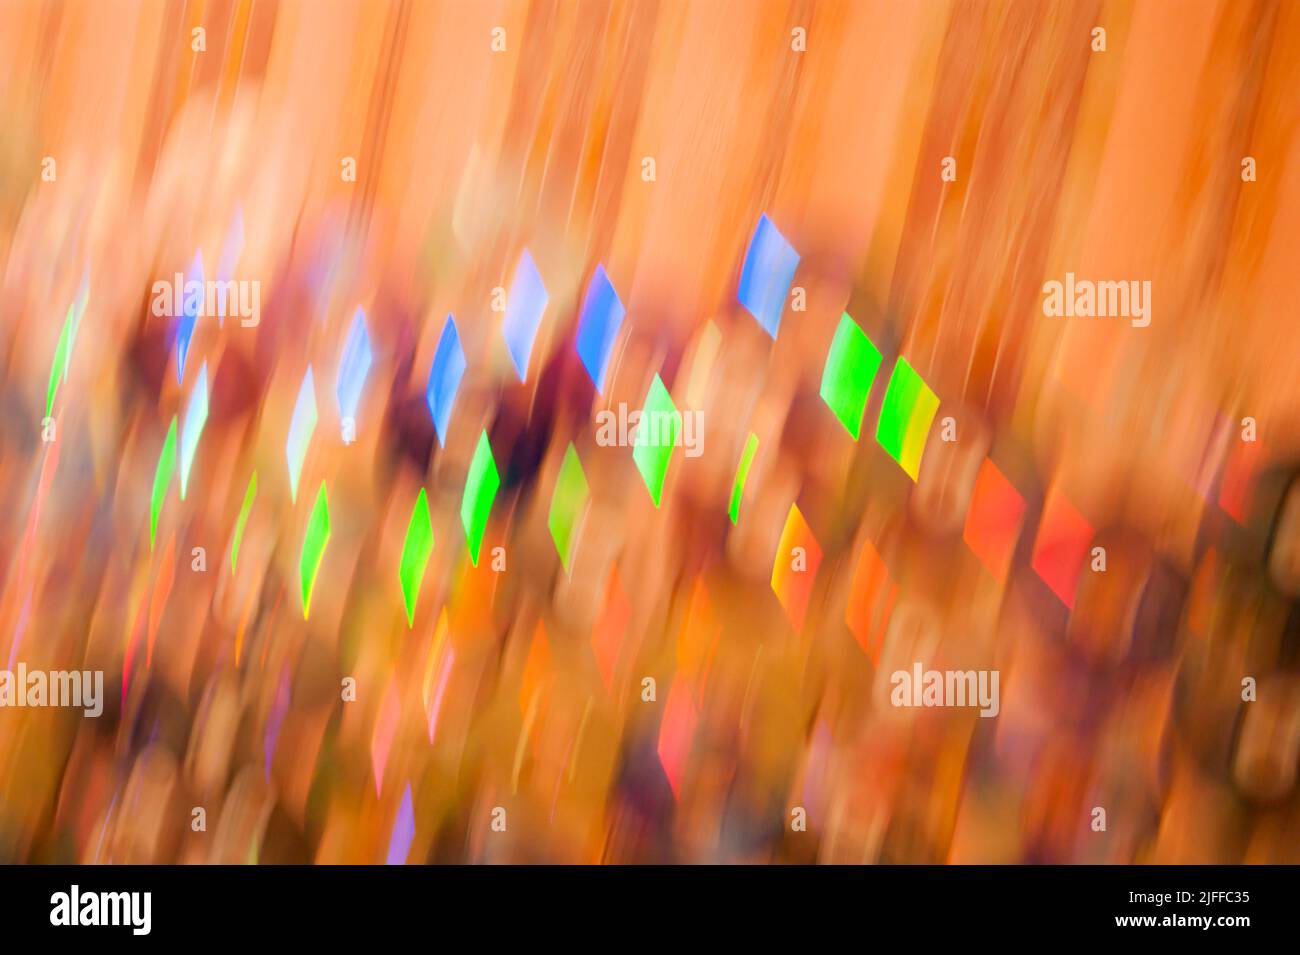 Horizontal photo - colored lights in motion. Dynamics, defocus. Colors - orange blue green red Stock Photo